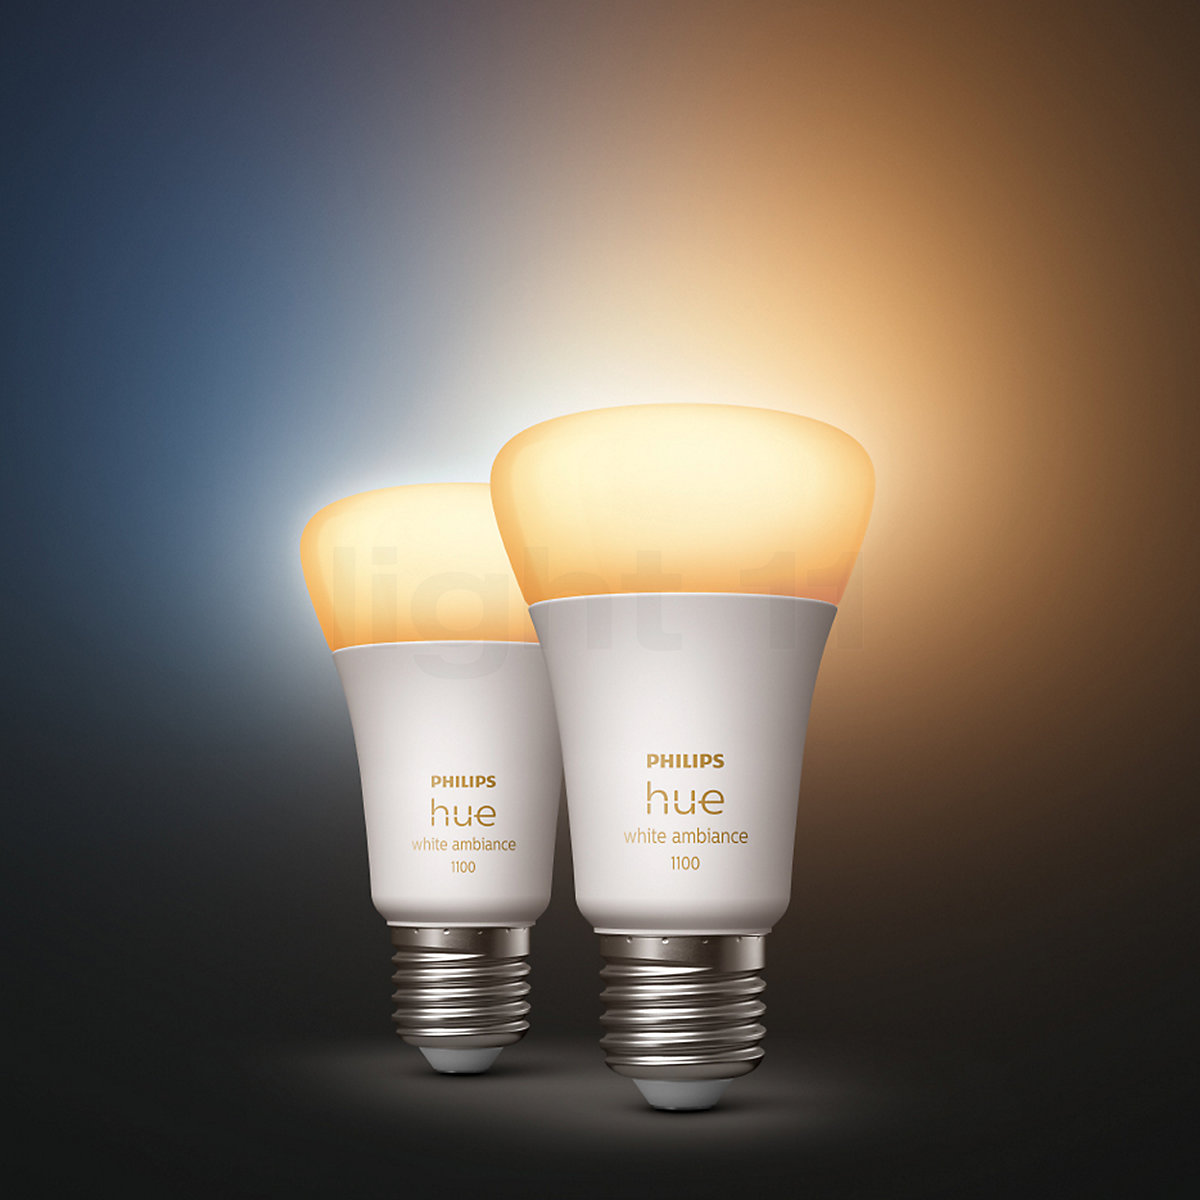 philips hue 800lm